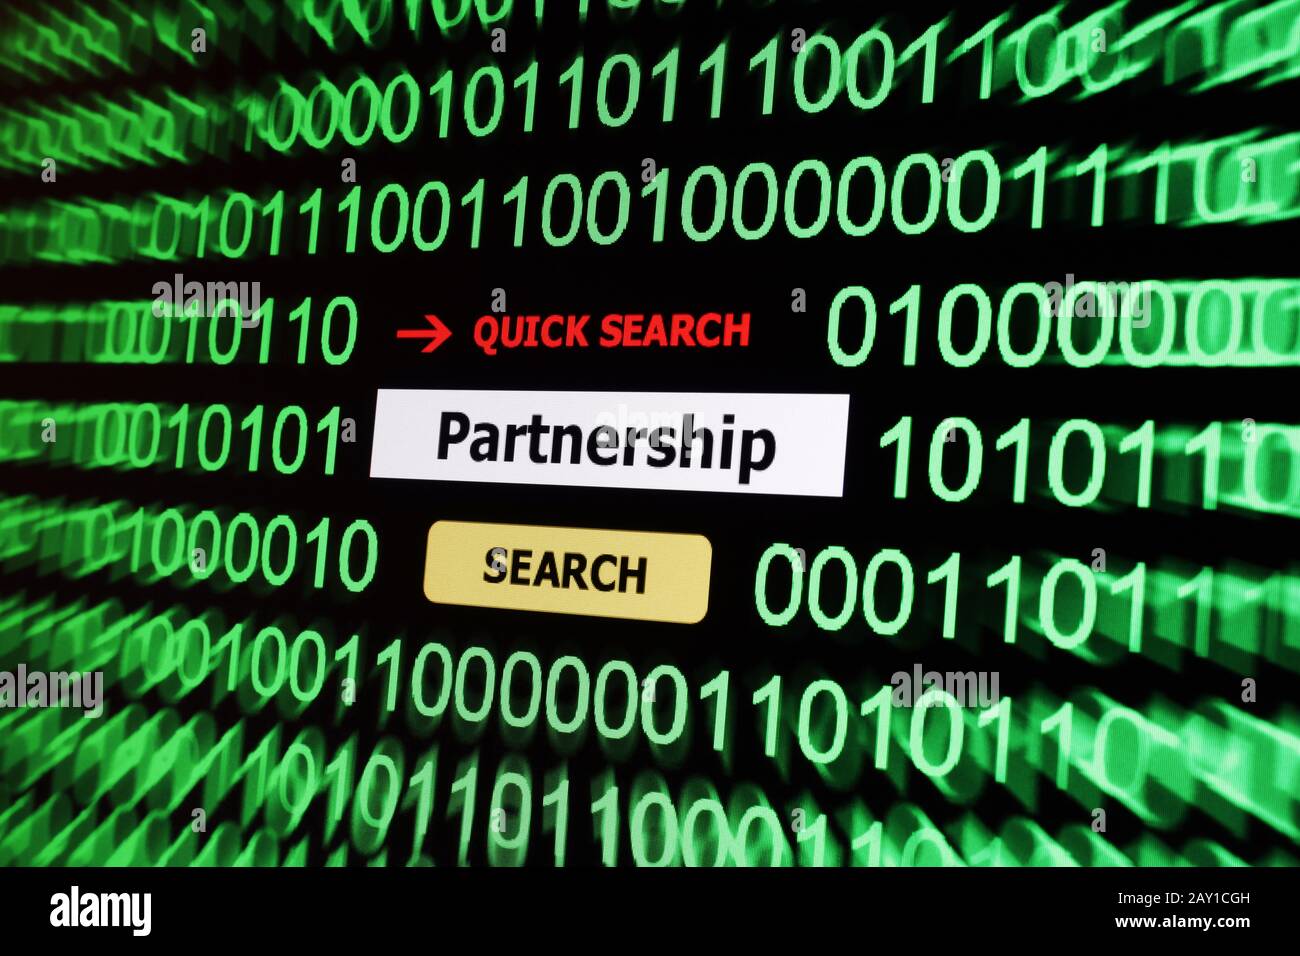 Search for partnership Stock Photo